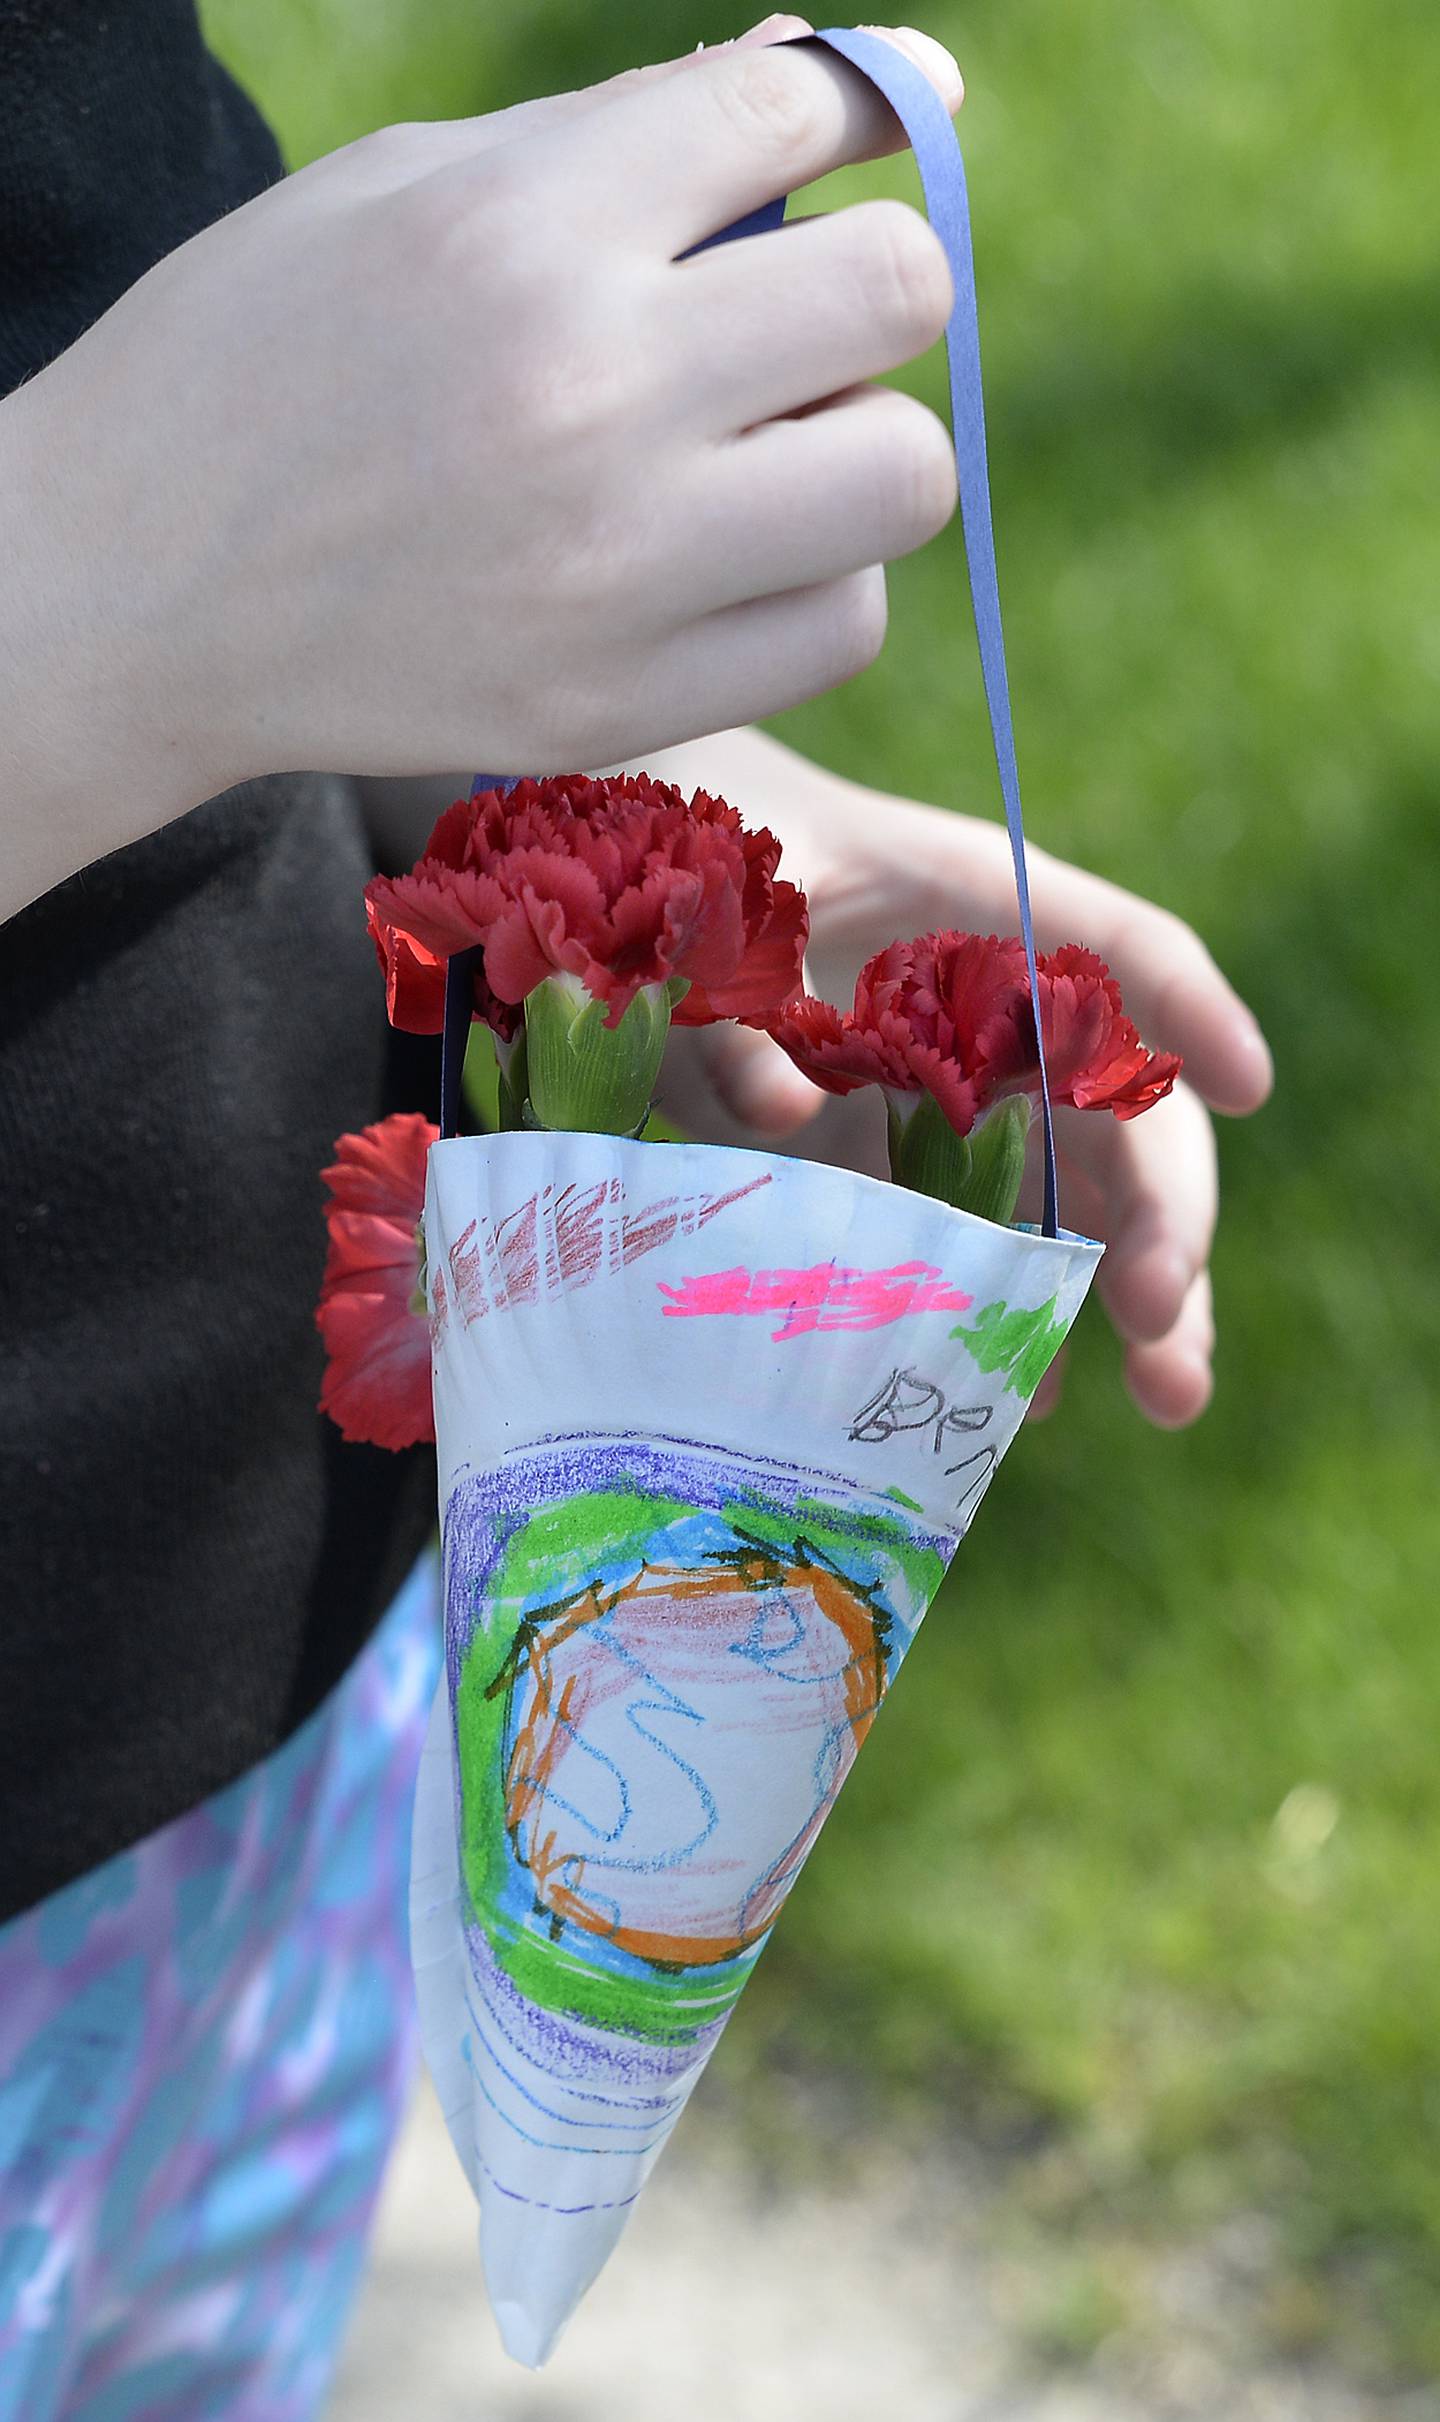 An example of one of the May baskets made by the kindergarten through second grade students at Grand Ridge Grade School and delivered Thursday, May 12, 2022.